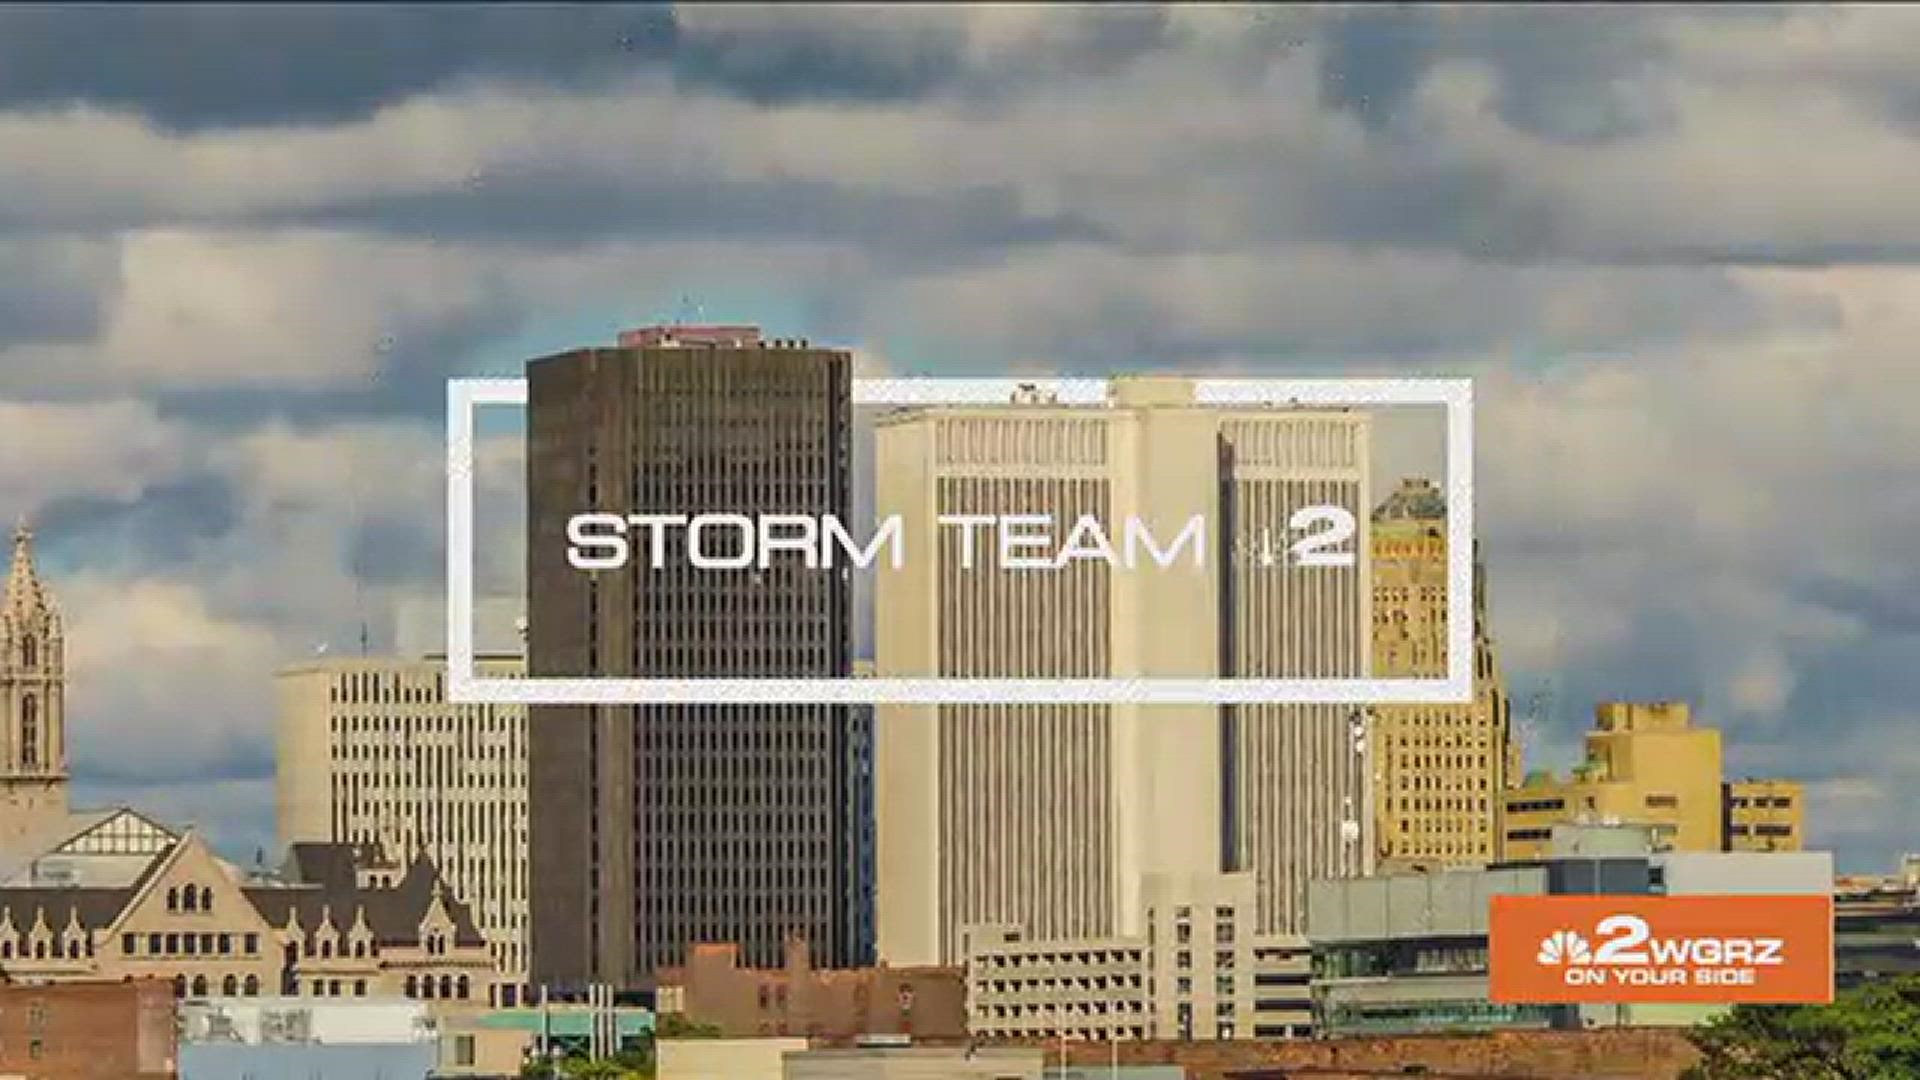 Storm Team 2 has your weather forecast with Carl Lam.